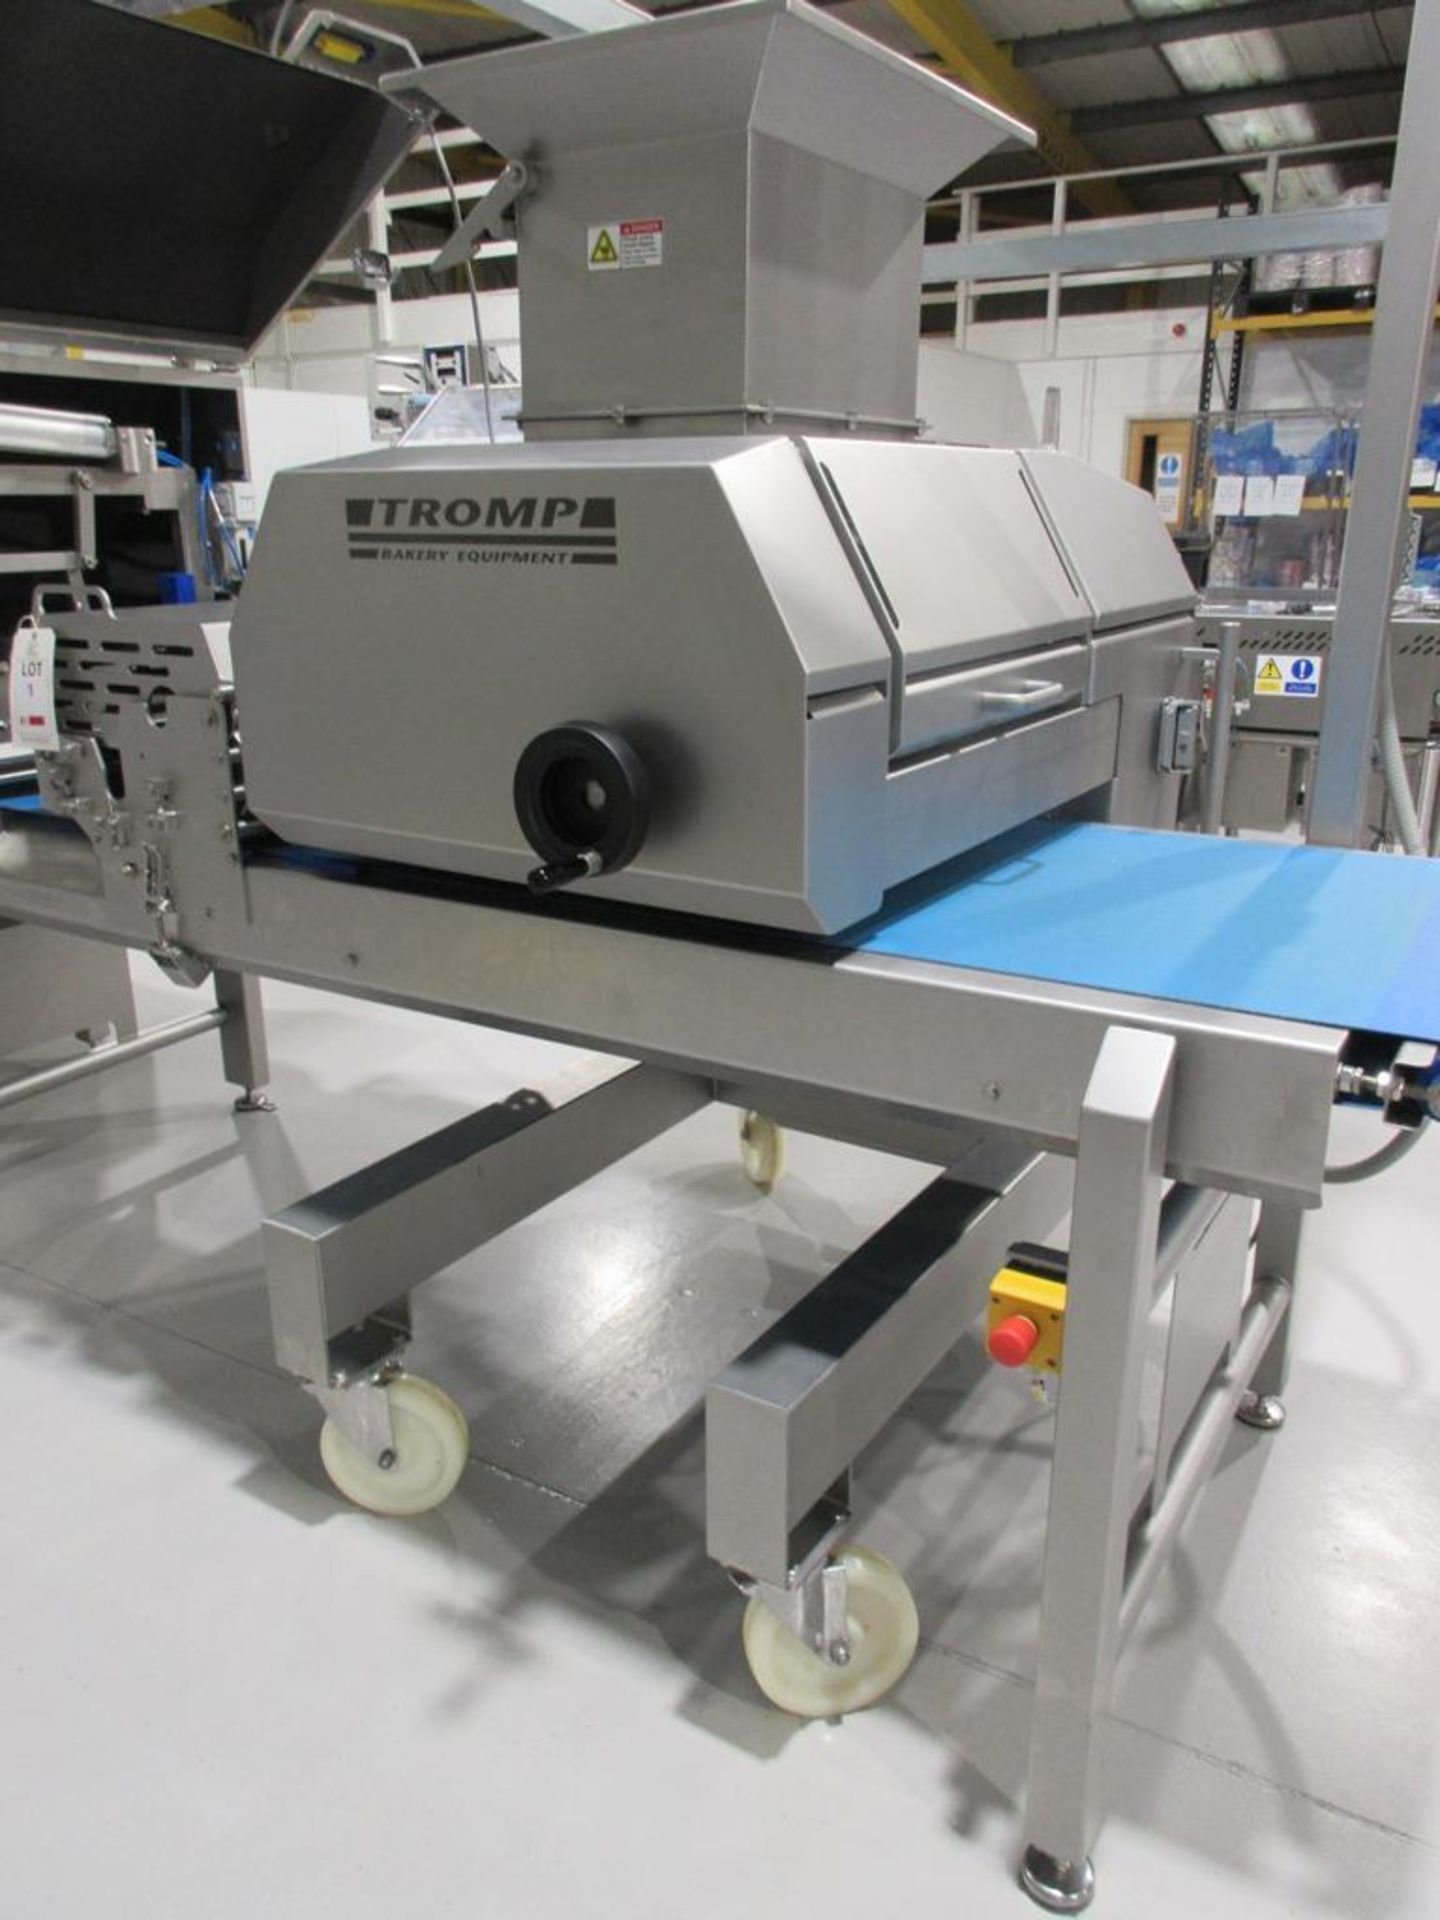 Tromp Bakery Equipment 600 stainless steel production with stainless steel pull over roll sheet - Image 12 of 21